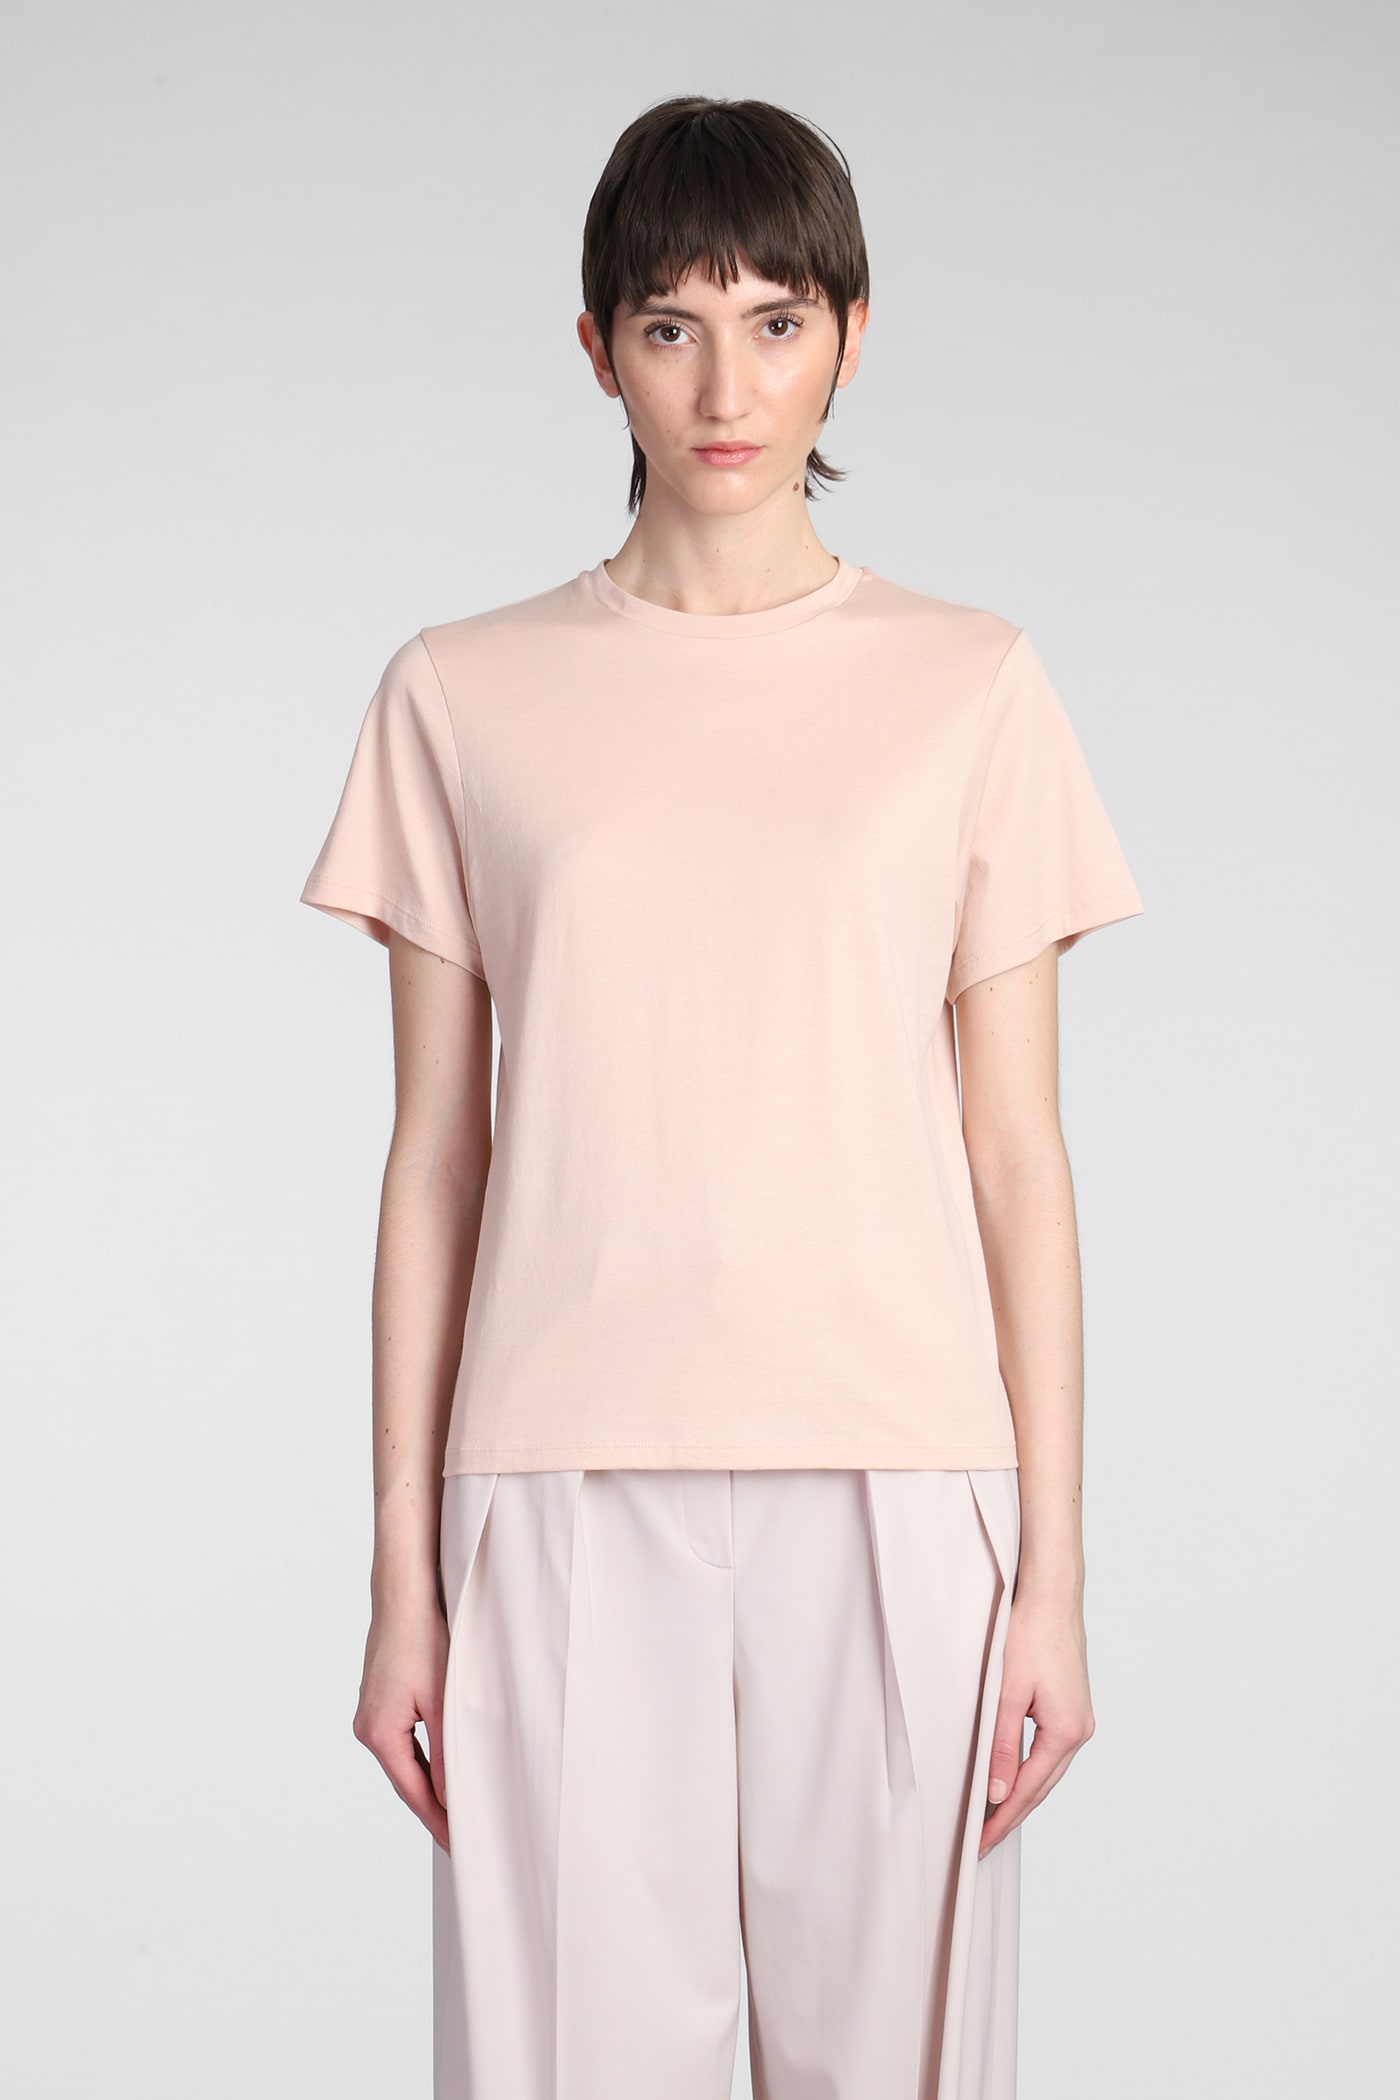 THEORY T-SHIRT IN ROSE-PINK COTTON